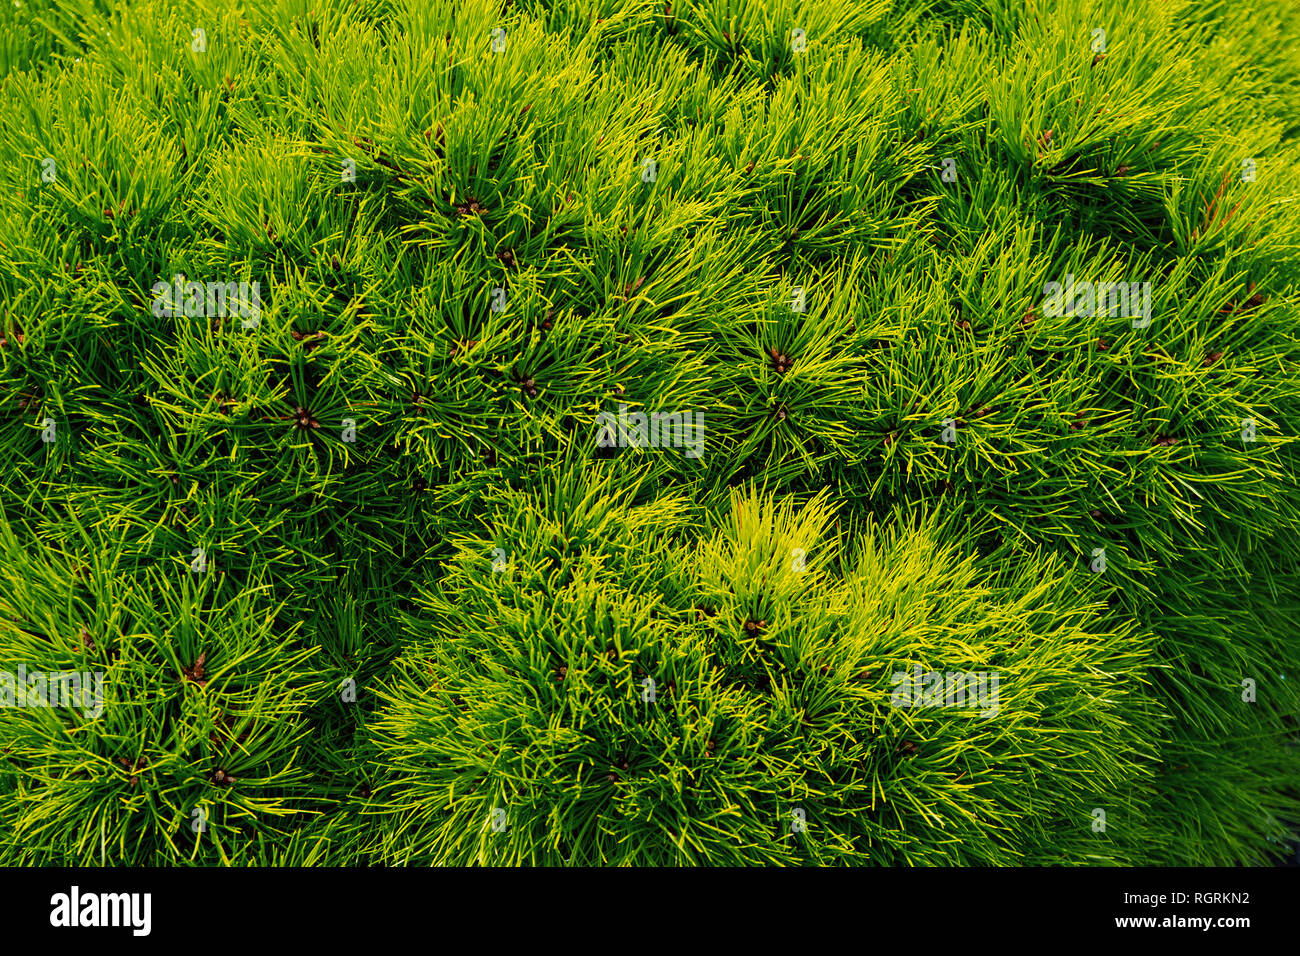 Pine fir tree needles as green background. Christmas tree branches. Evergreen forest or wood. Nature and environment. Green plant background. Stock Photo